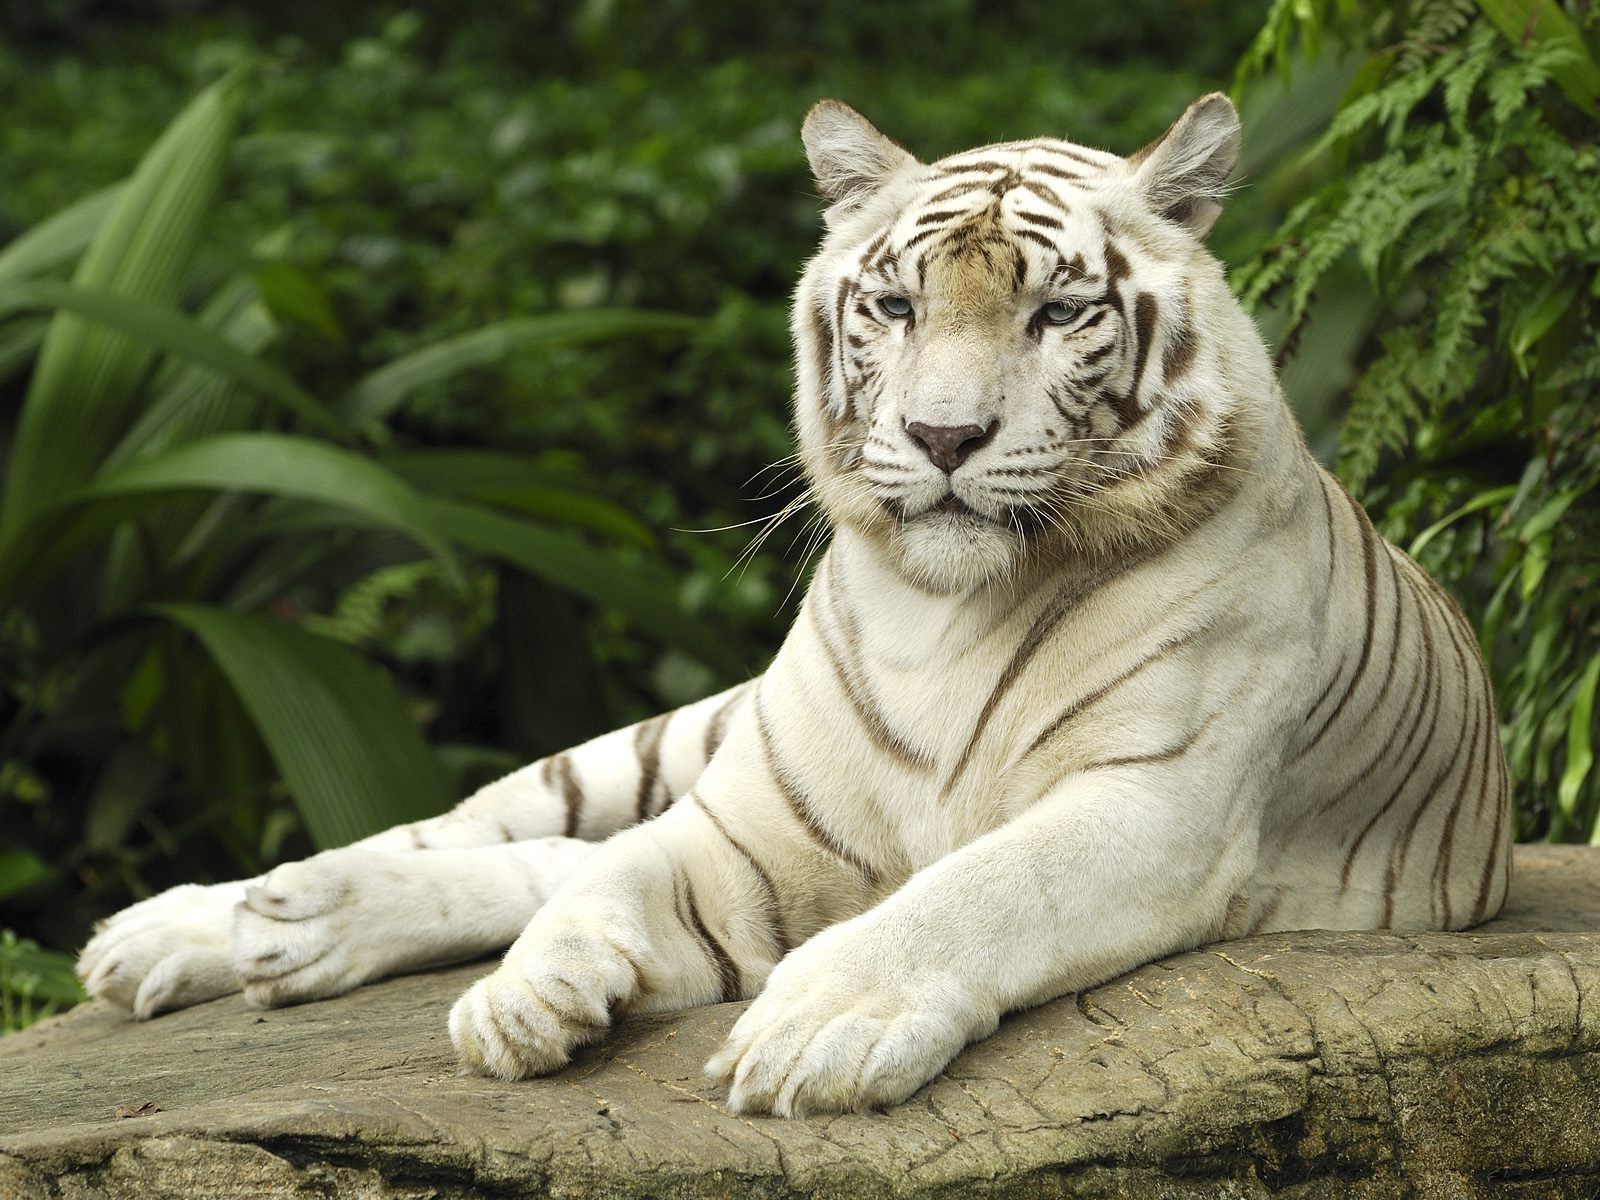 tiger animals nature white tigers Wallpapers HD Desktop 